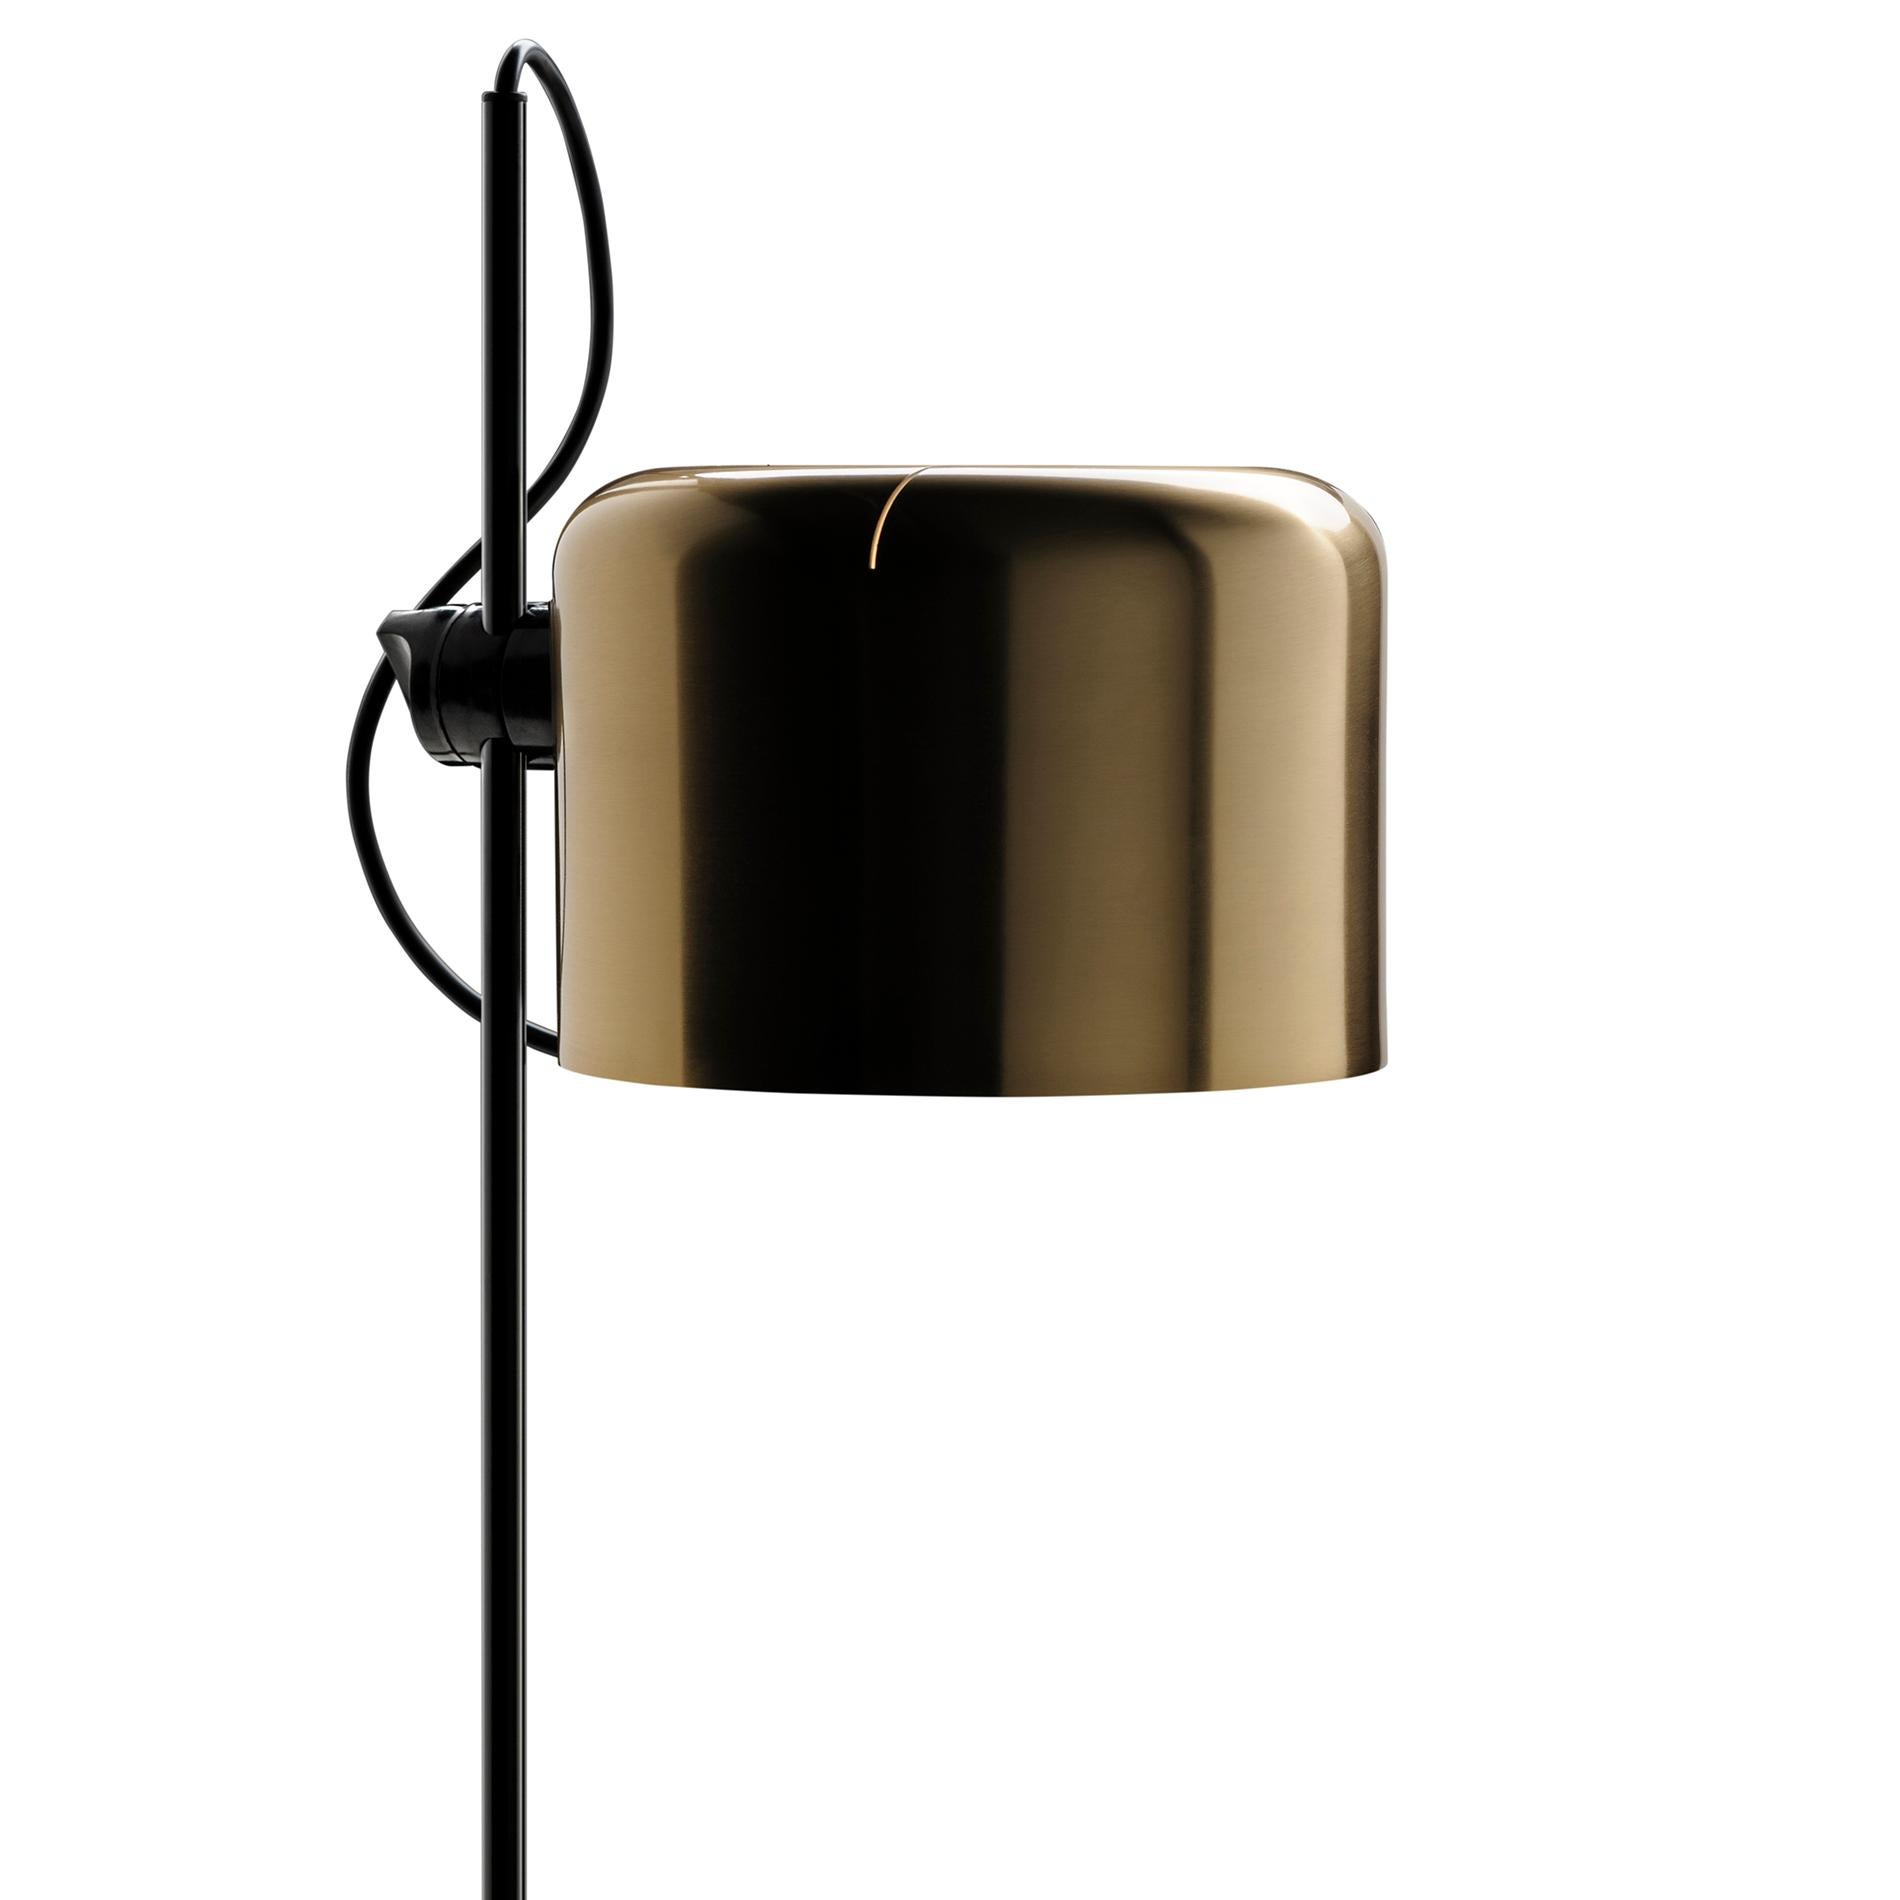 Floor lamp 'Coupé' designed by Joe Colombo in 1967.
Floor lamp giving direct light, lacquered metal base, chromium-plated stem, adjustable reflector in lacquered aluminium. Manufactured by Oluce, Italy.

It was 1967 when Joe Colombo designed